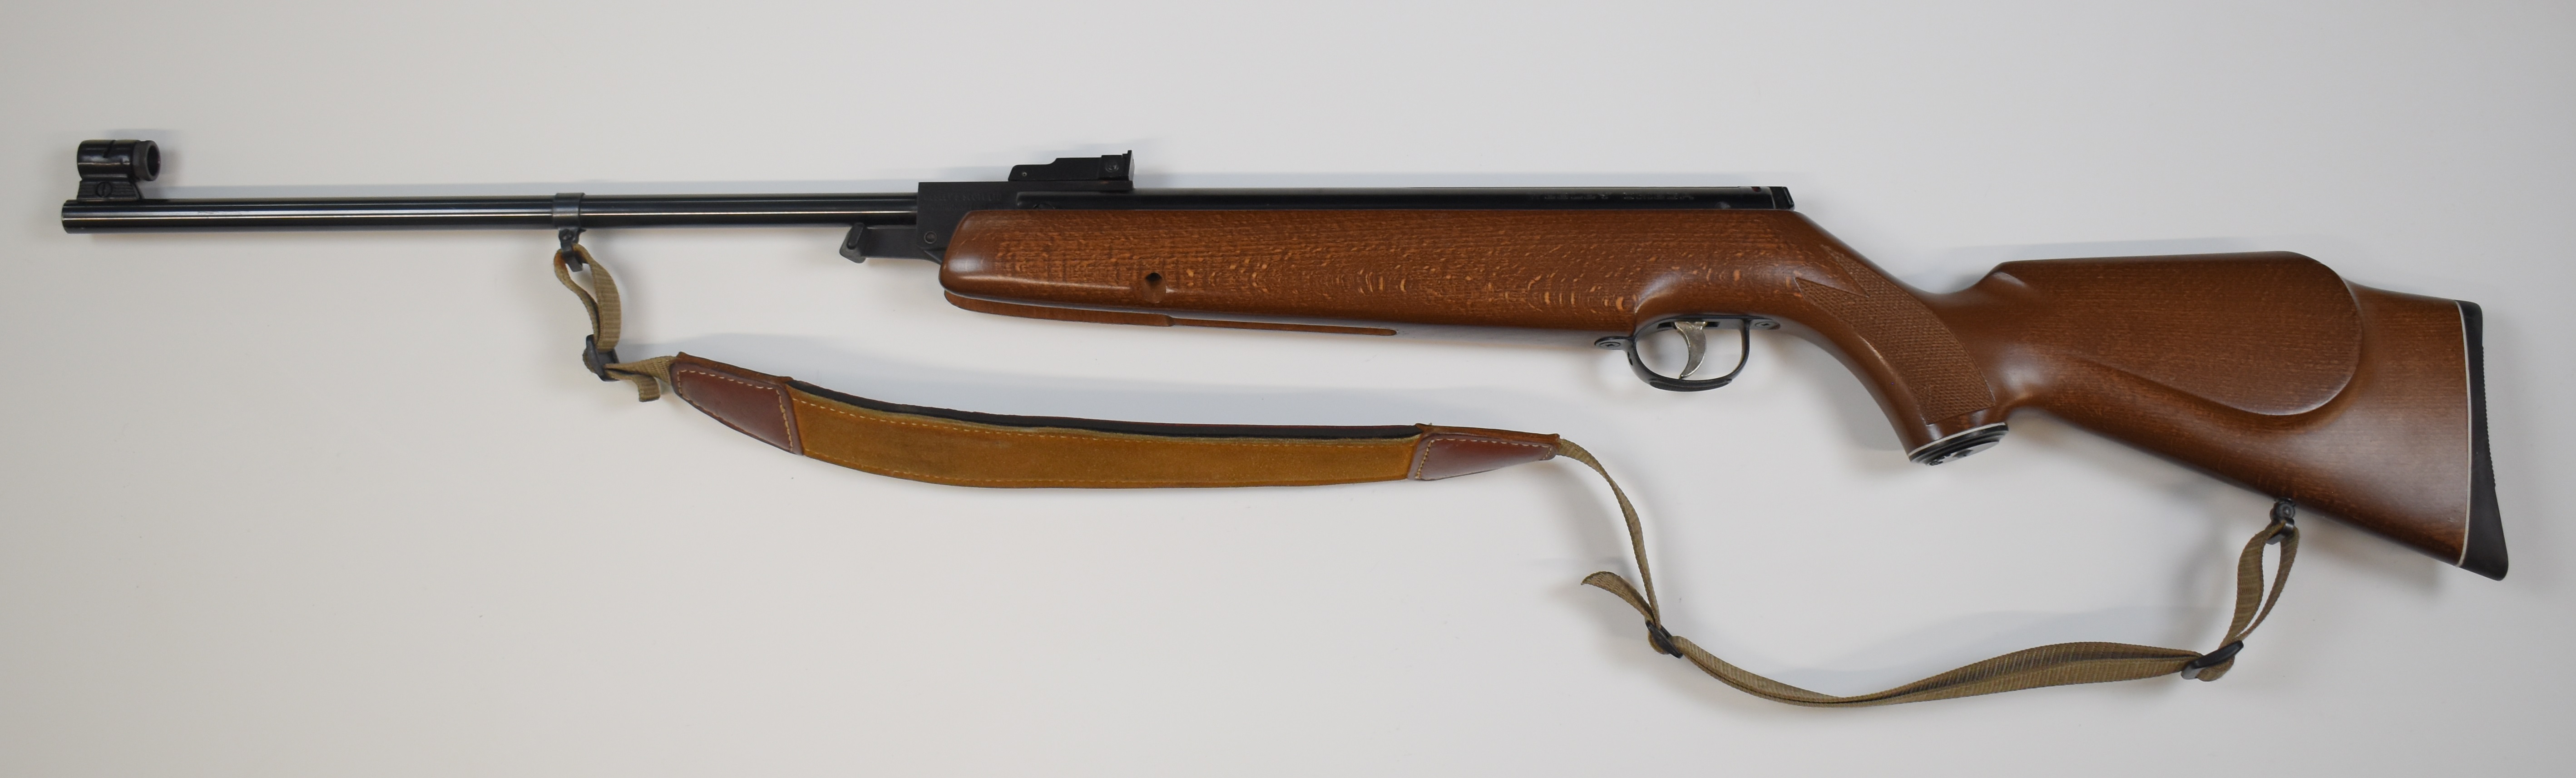 Webley Omega .177 air rifle with chequered semi-pistol grip, raised cheek piece, padded canvas and - Image 7 of 12